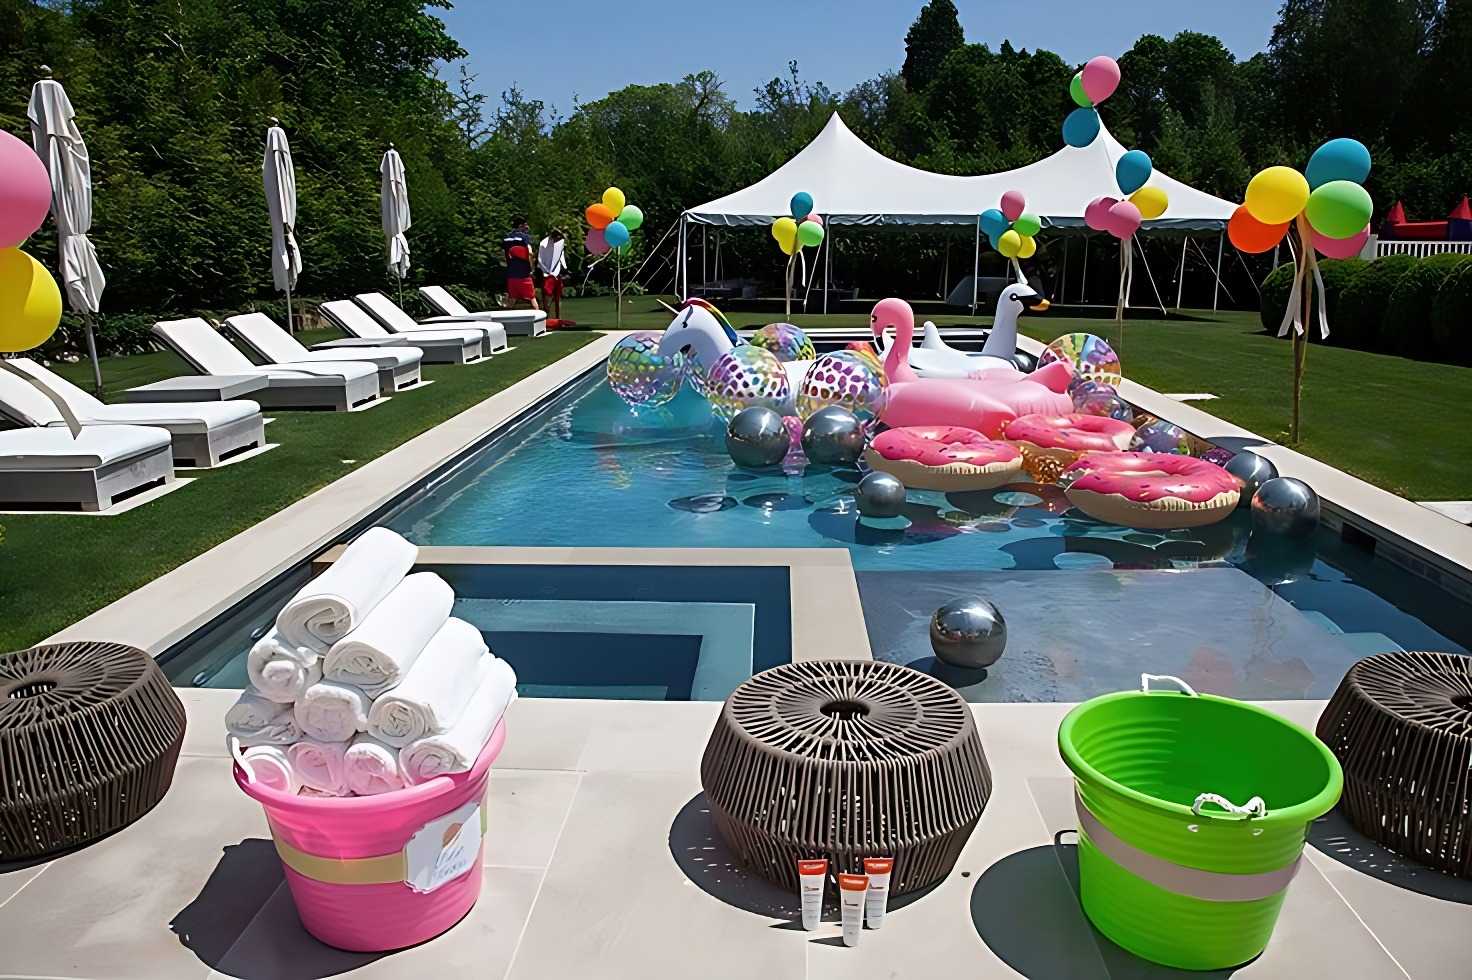 Pool Party Invitations for Teenagers.tring